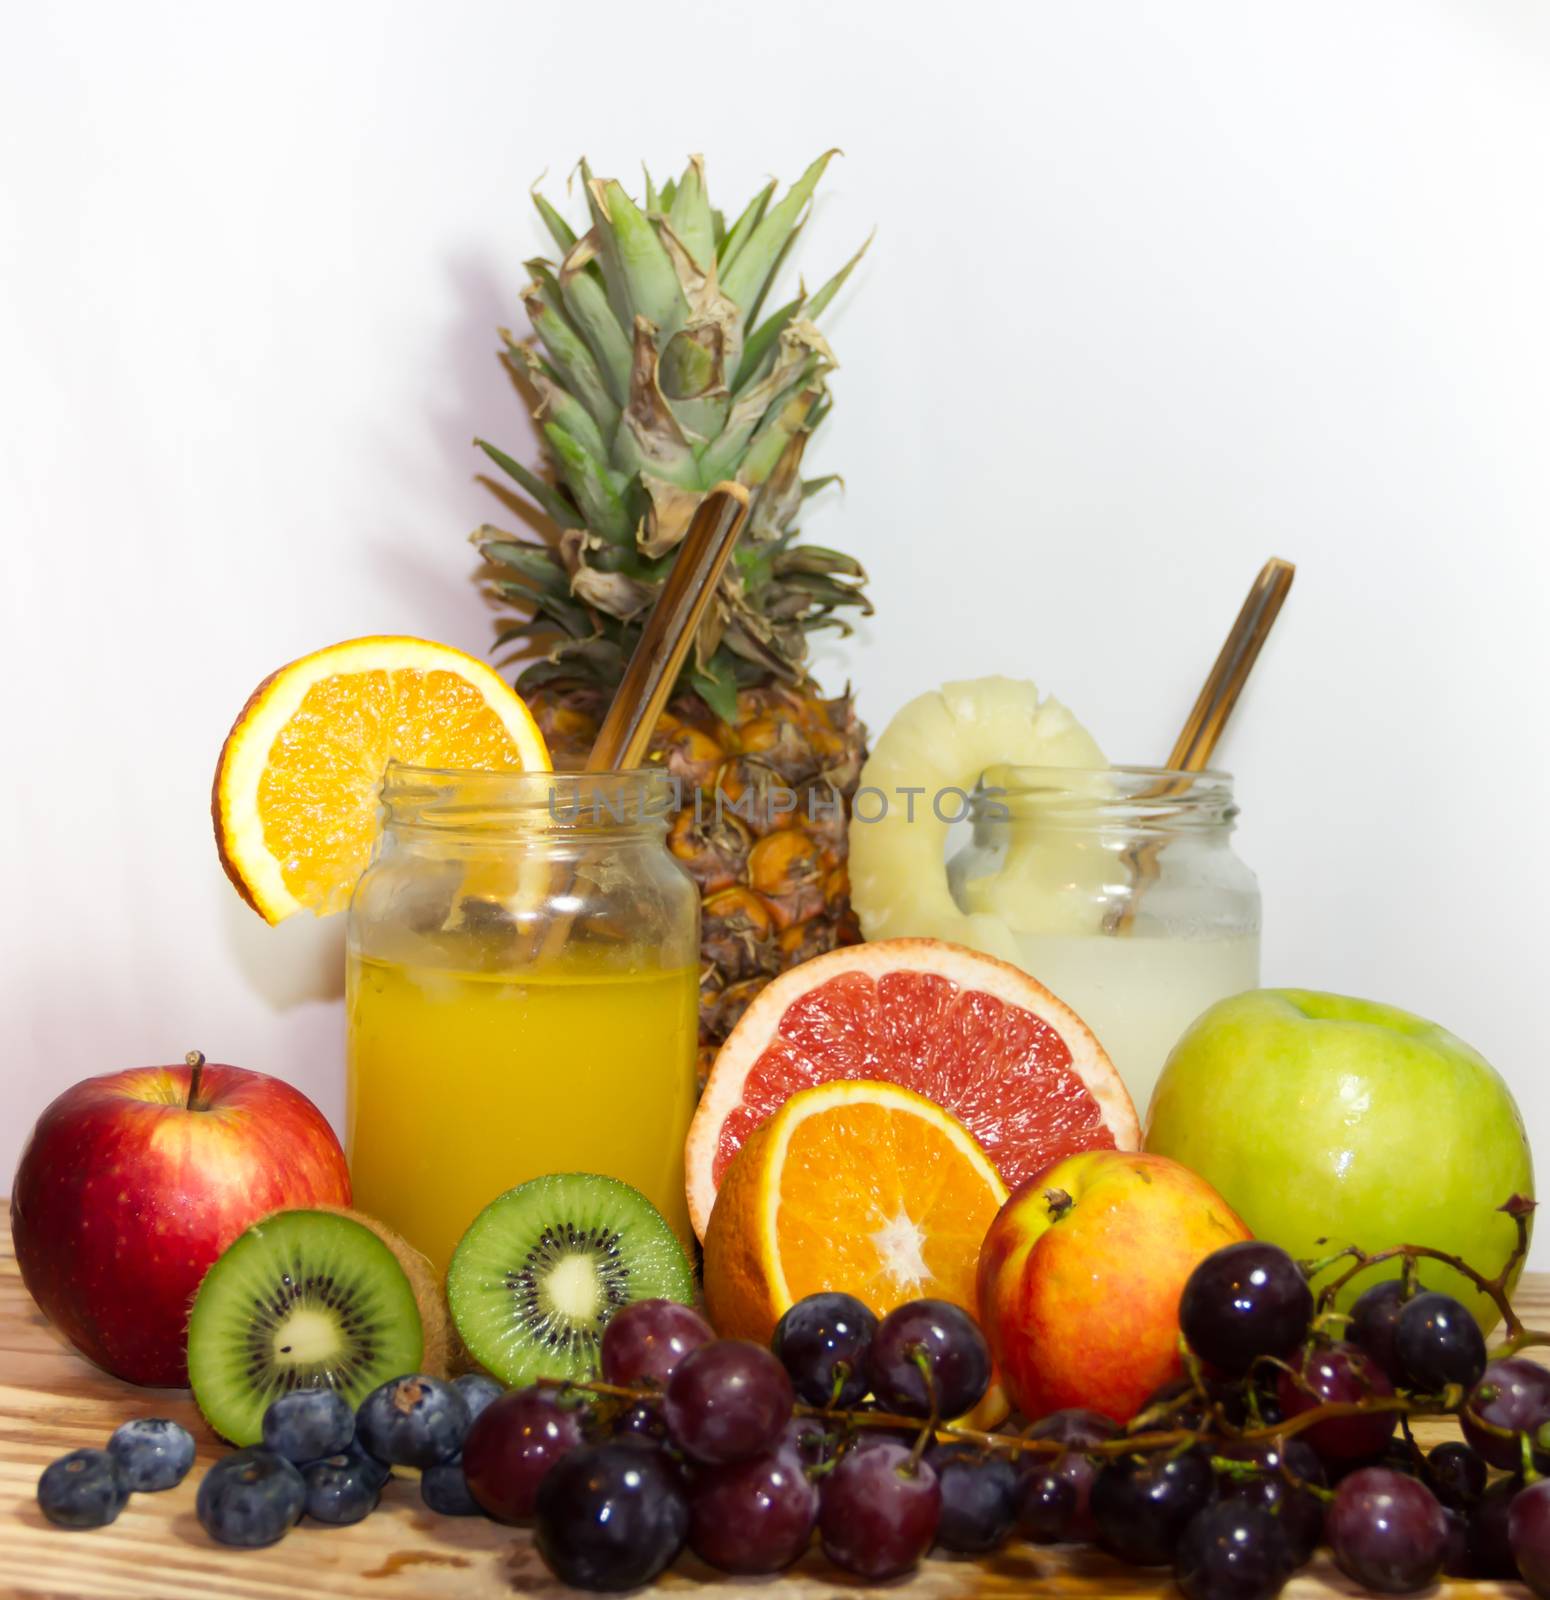 Juices smoothies and fresh pineapple and orange drinks with summer fruits by GabrielaBertolini